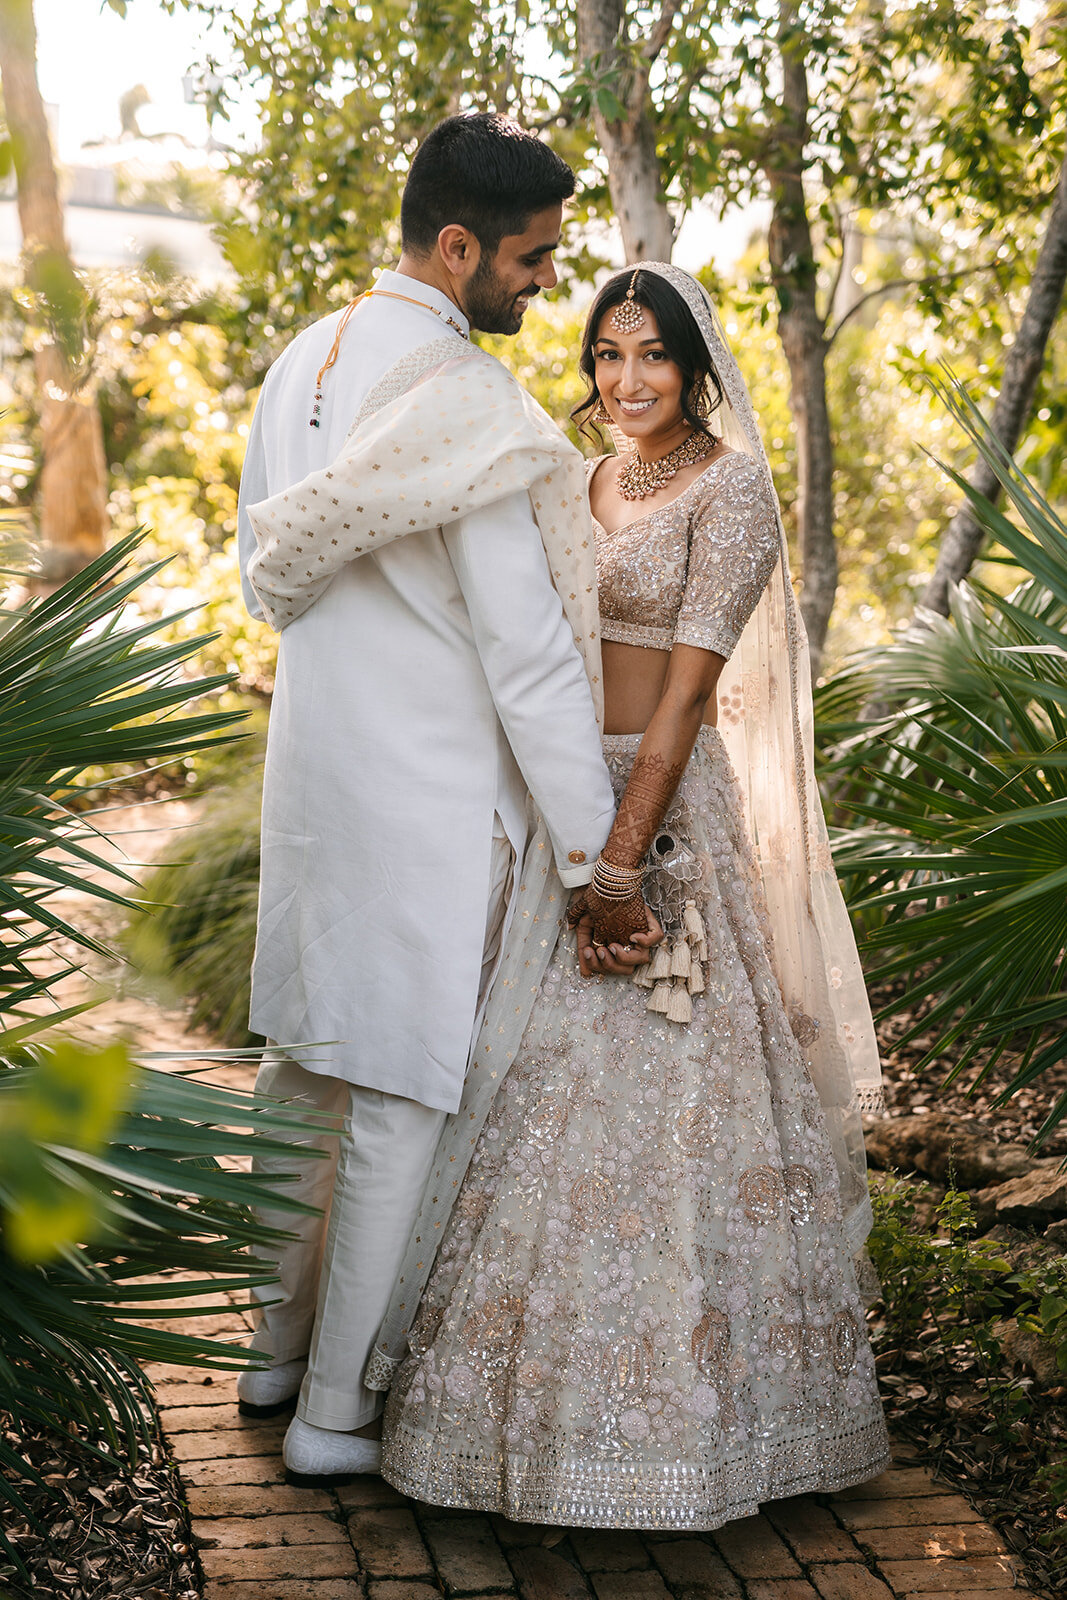 Miami Intimate Indian Wedding_Kristelle Boulos Photography-37